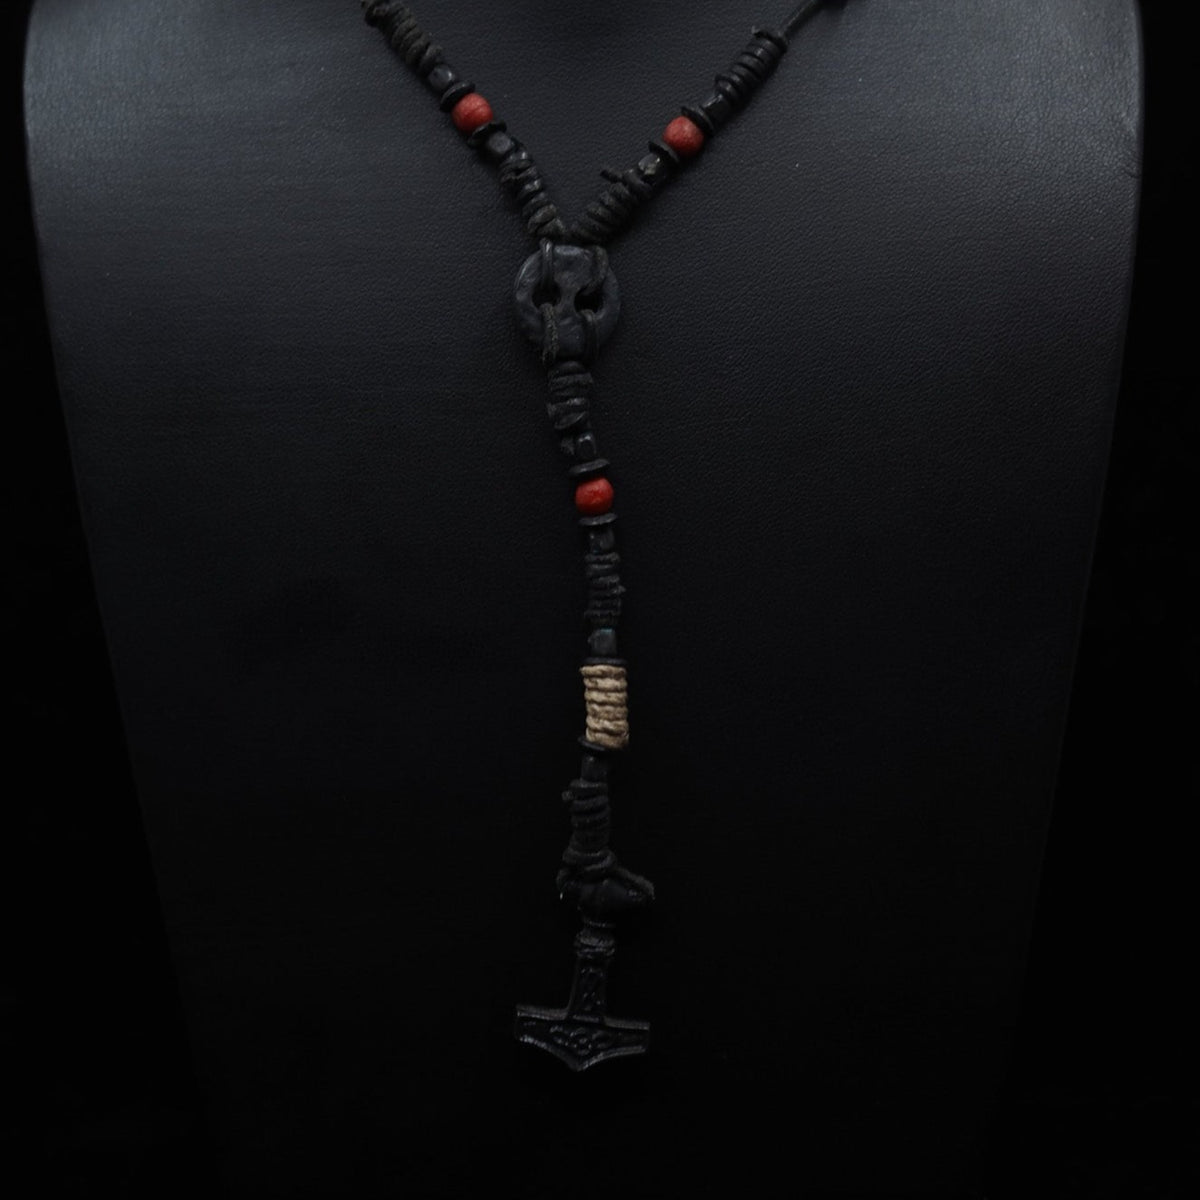 Necklace Thor's Hammer